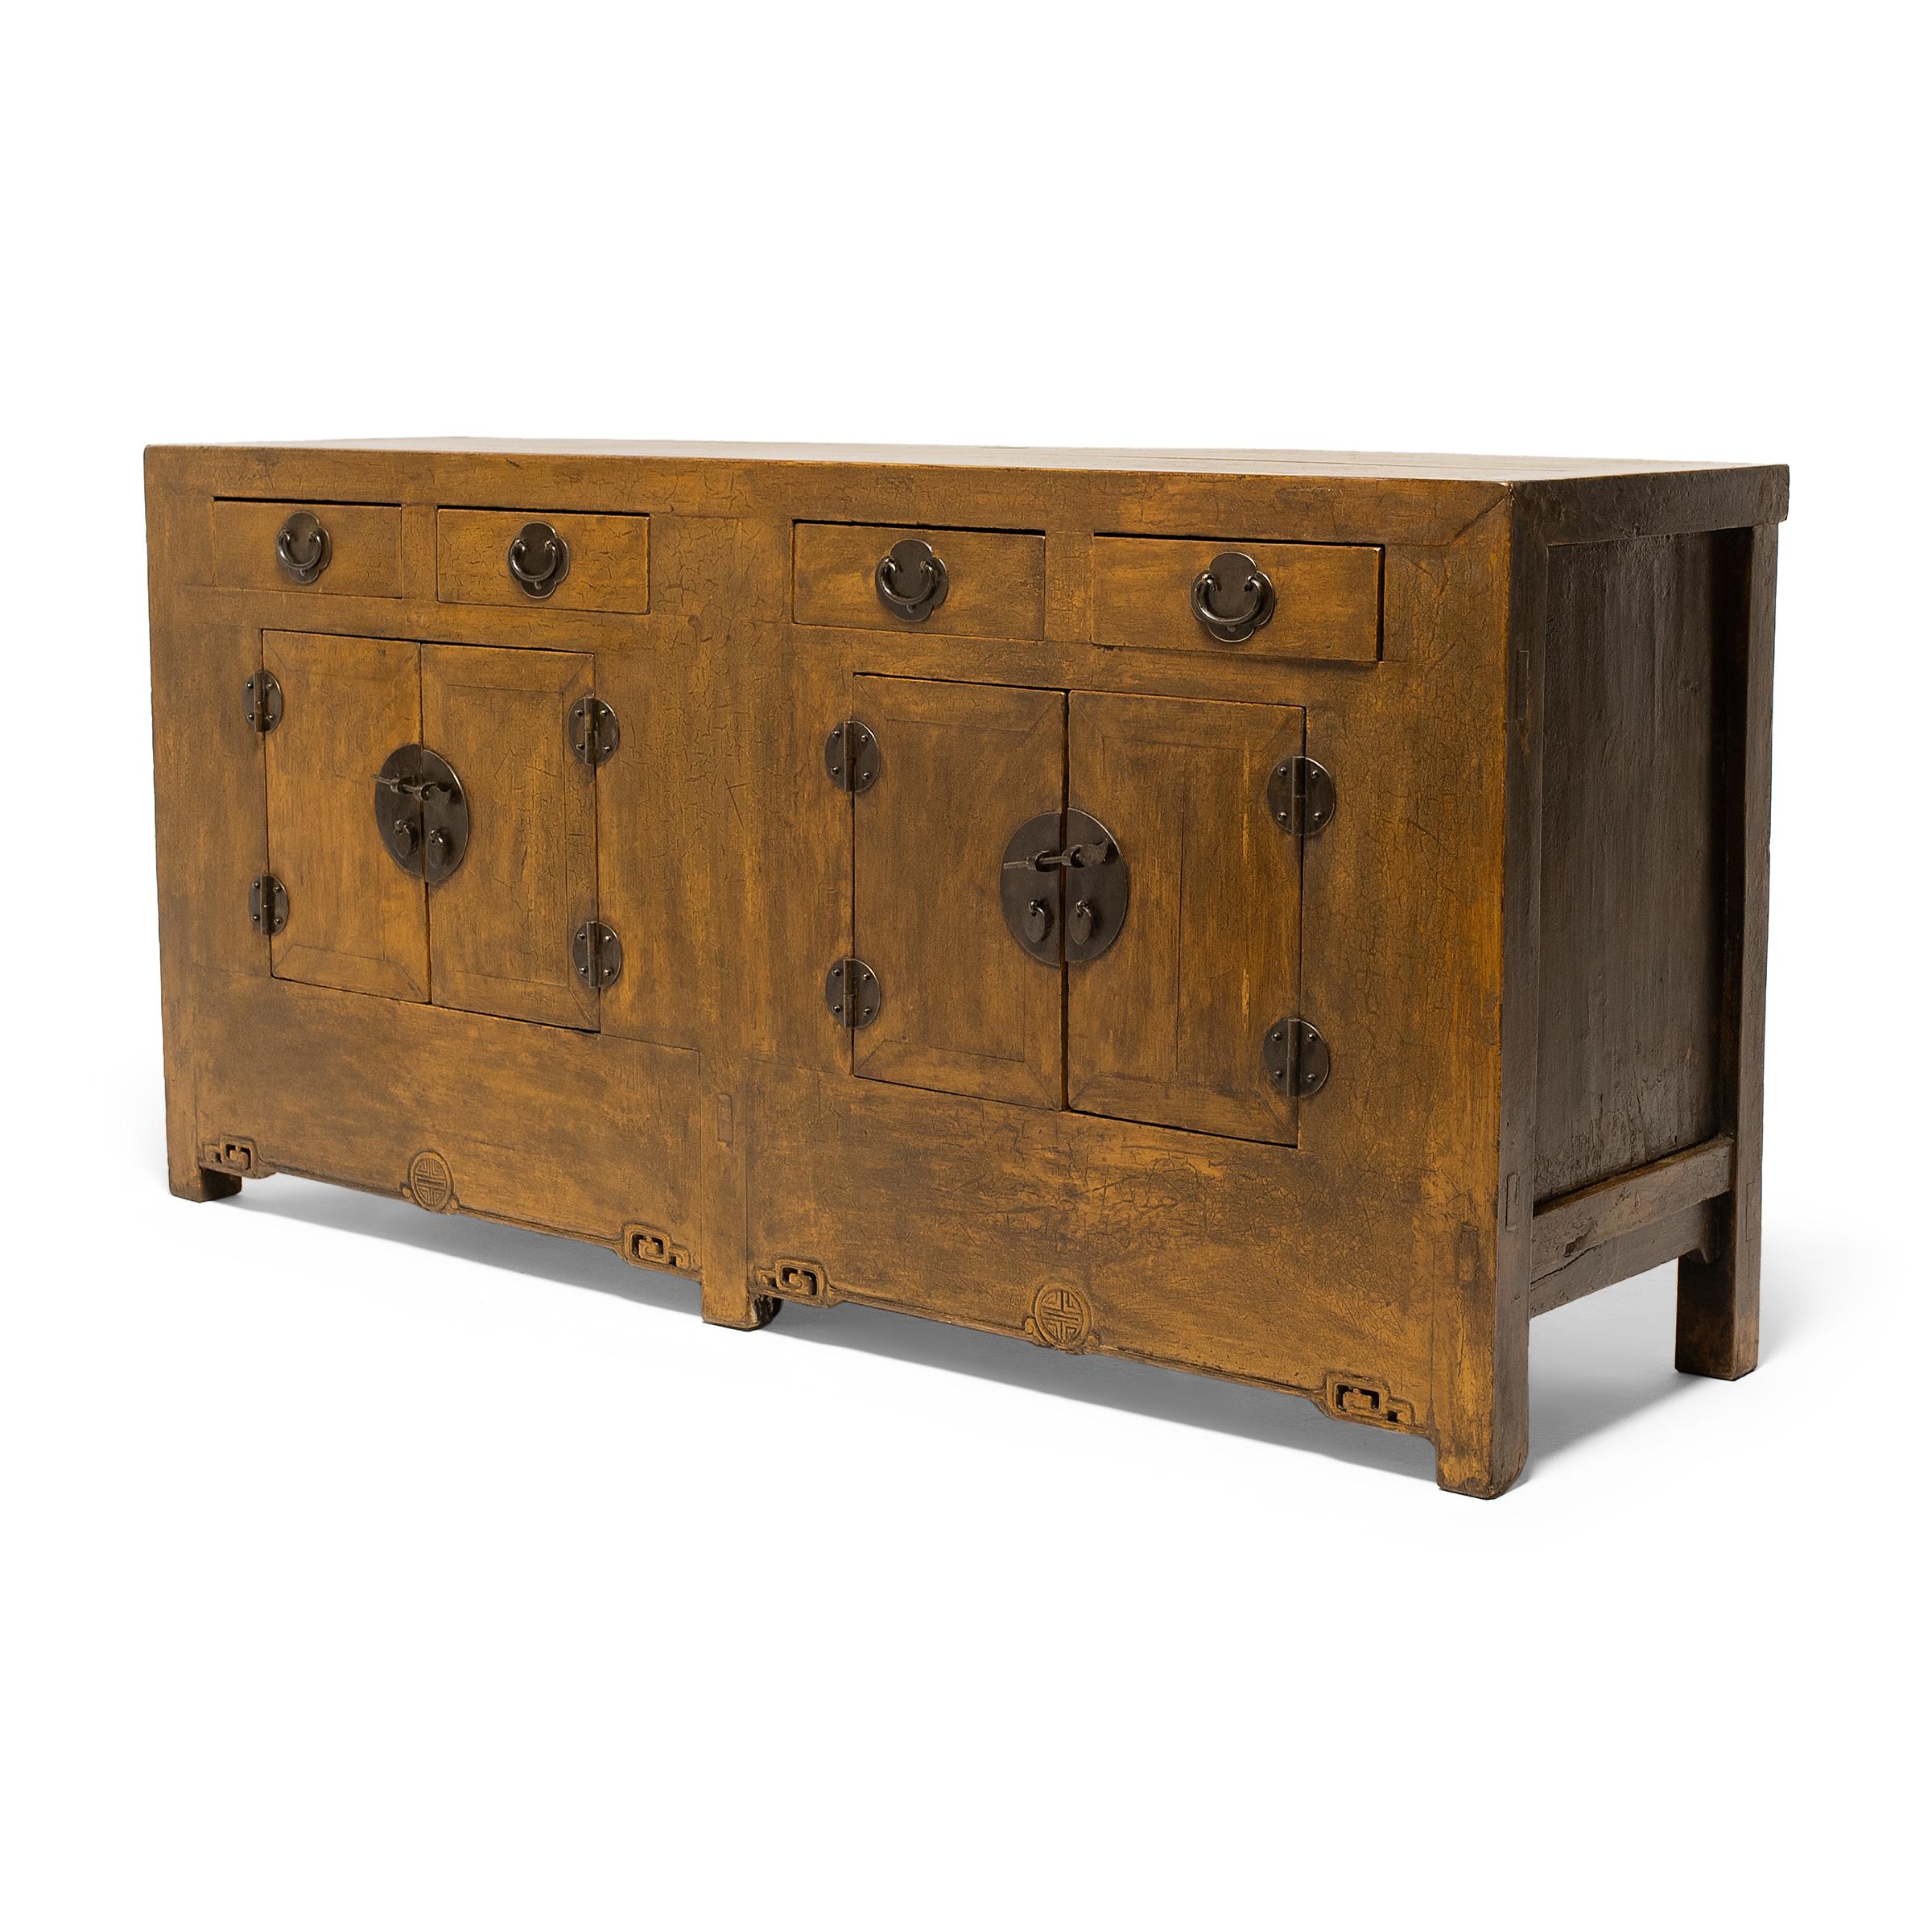 While most Chinese lacquered furniture is black or red in color, this 19th-century storage coffer is colored by a marigold-yellow lacquer finish with a wonderful crackled texture. The coffer's clean-lined design is accented by striking full moon